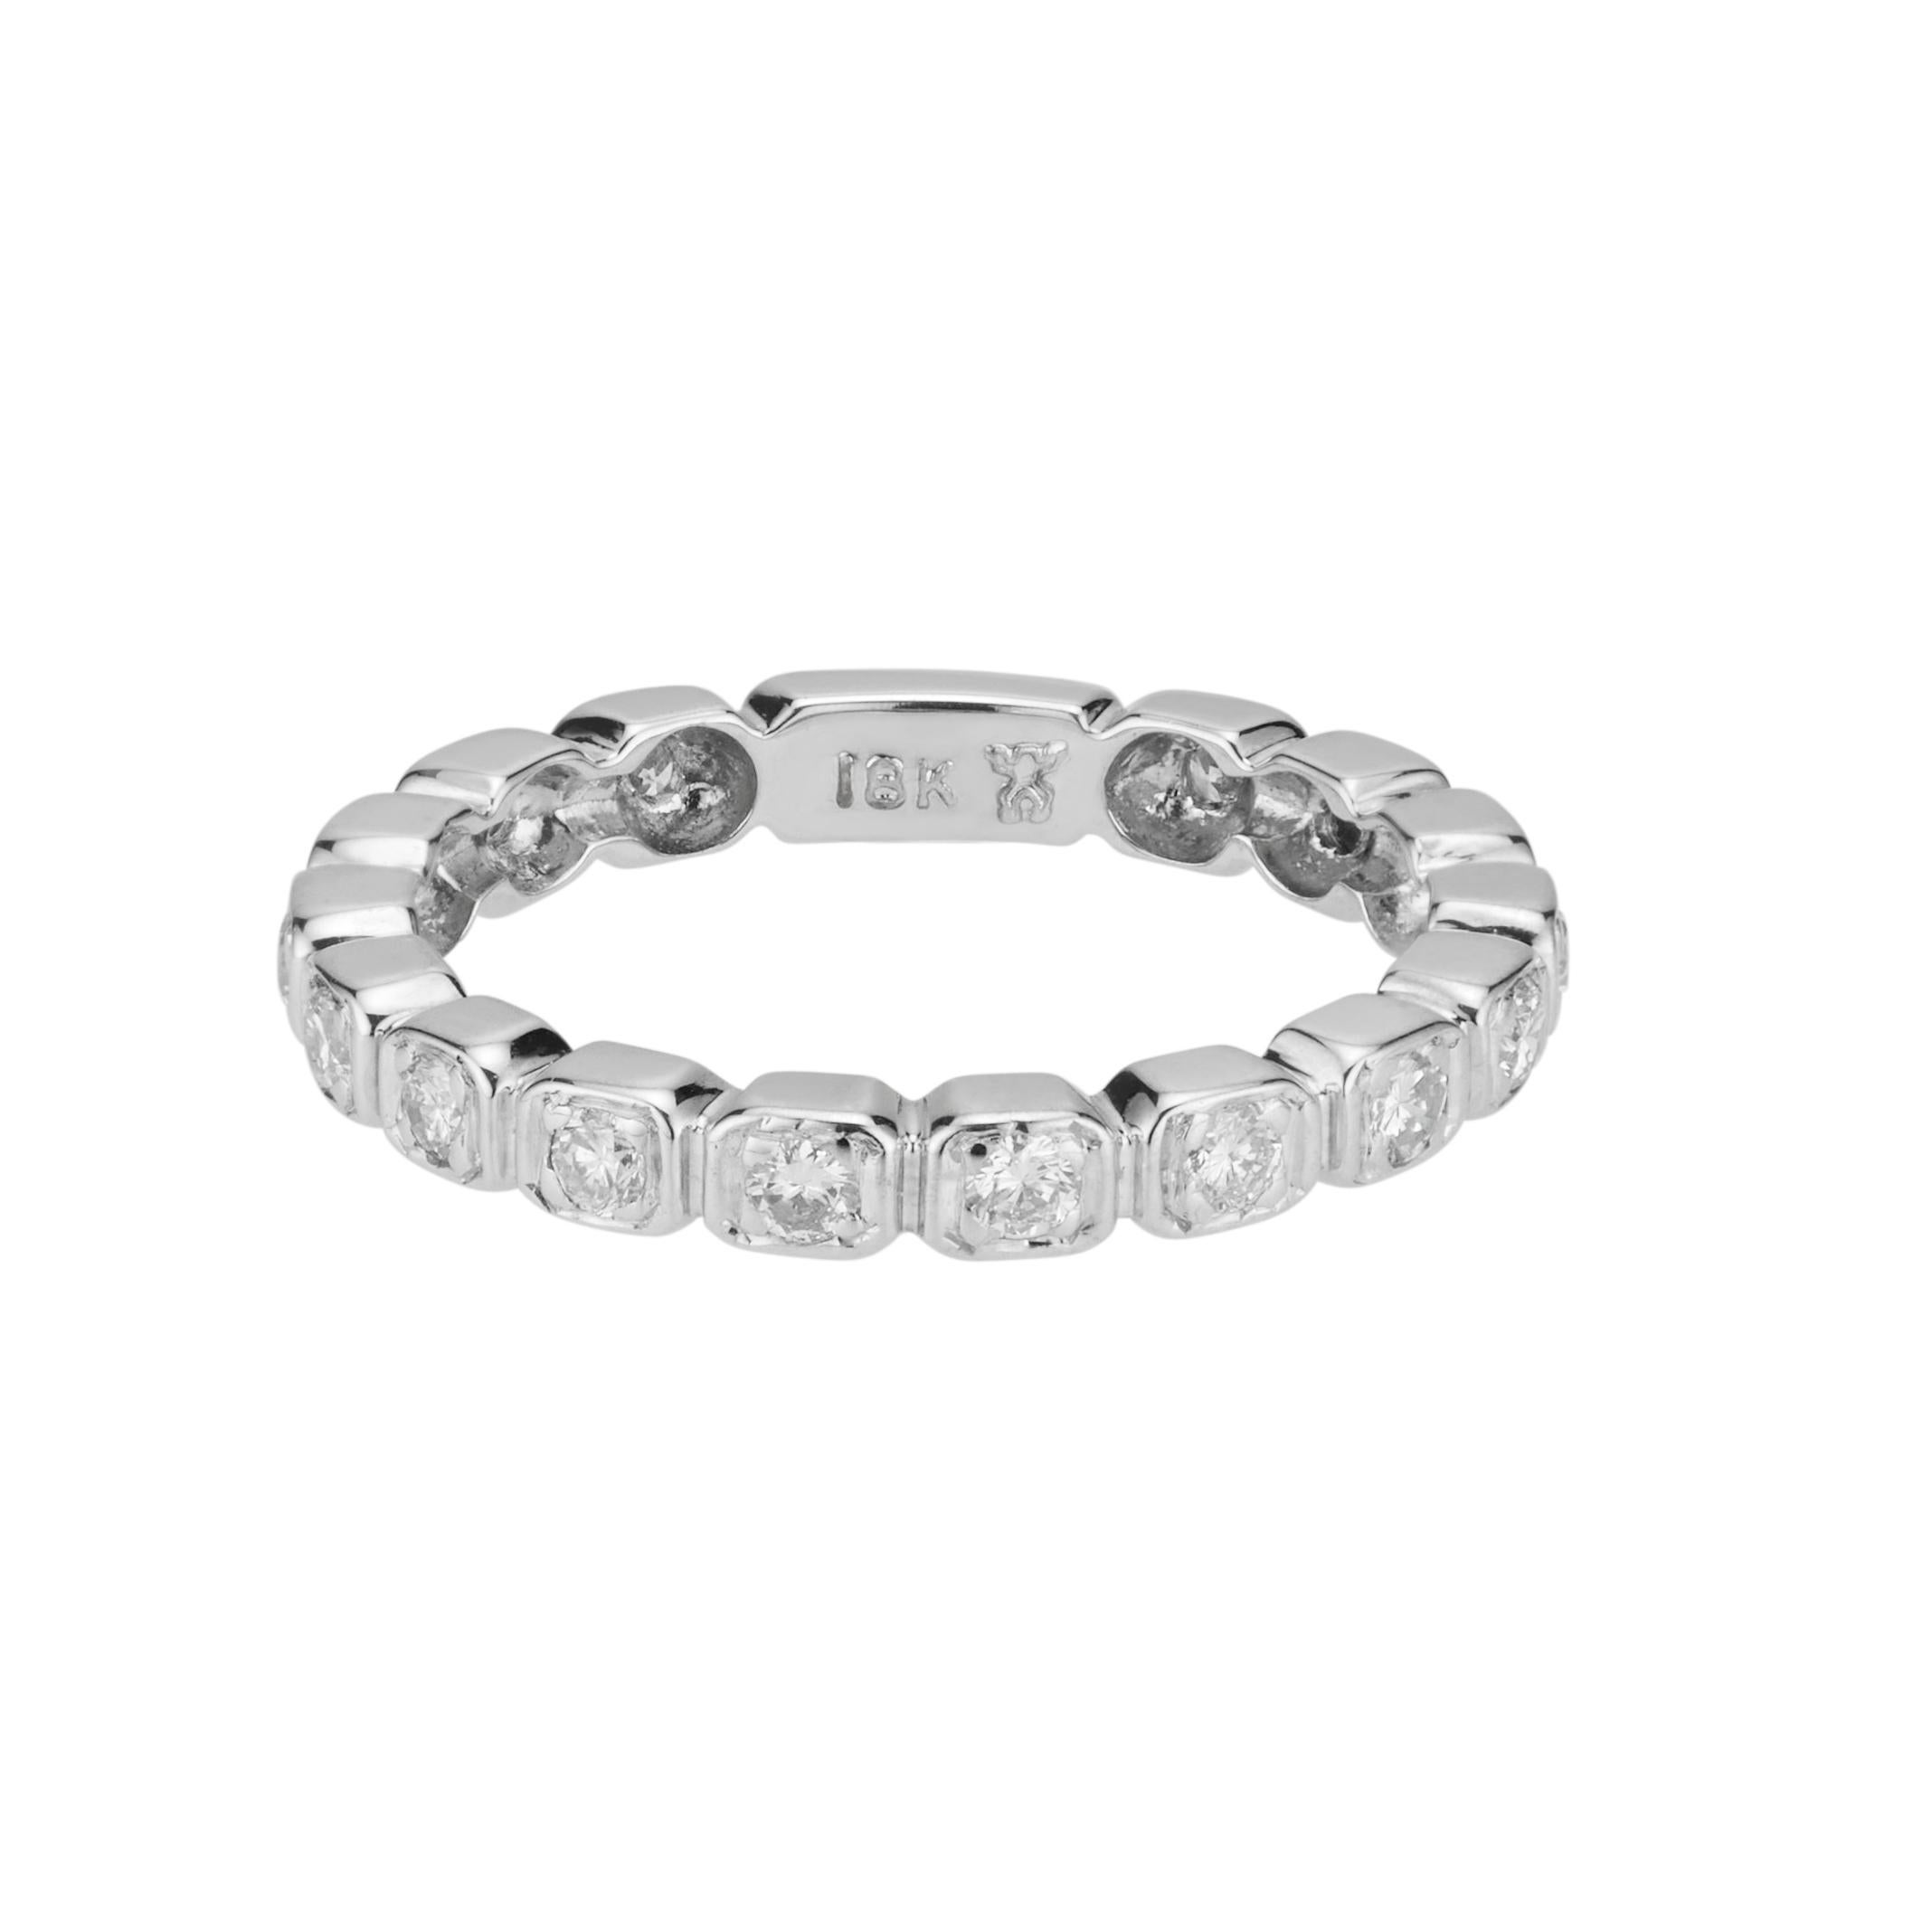 Diamond wedding band. 16 round brilliant cut diamonds totaling .32cts in a 18k white gold setting.  

16 round brilliant cut diamonds, H VS SI approx. .32cts
Size 6.75 and sizable
18k white gold 
Stamped: 18k
2.8 grams
Width at top: 2.8mm
Height at